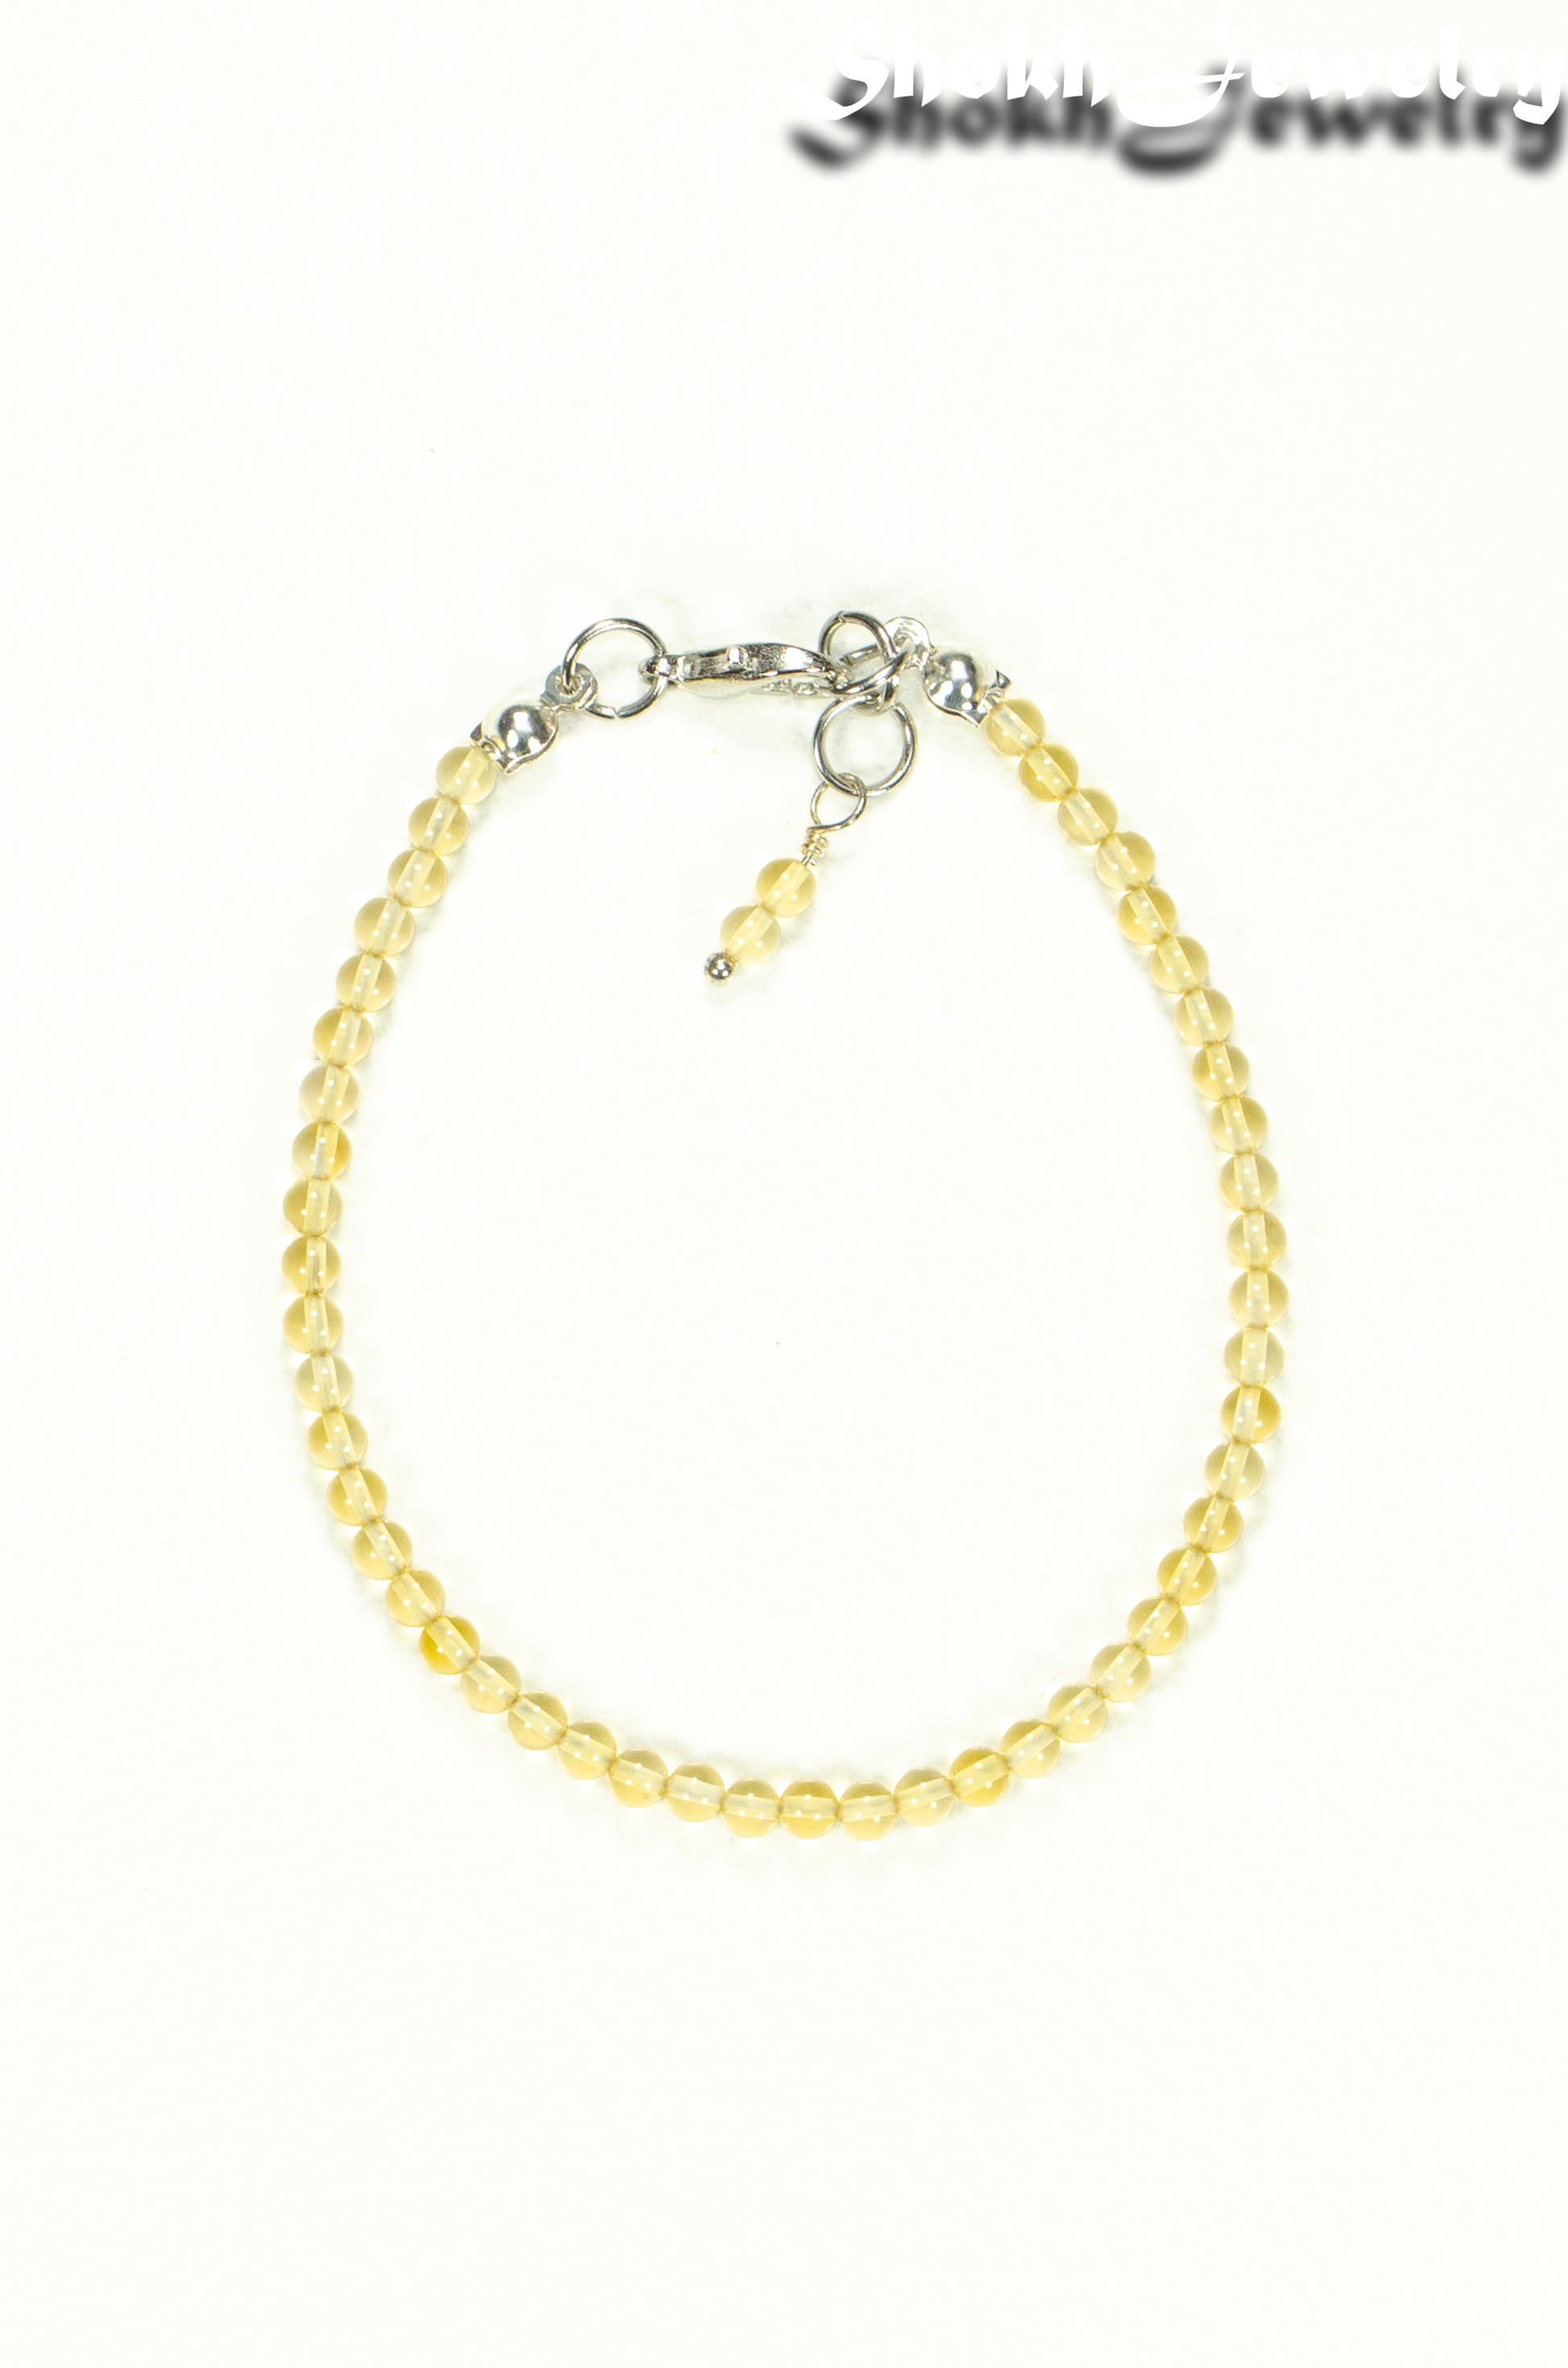 Top view of Dainty Citrine Bracelet with Clasp.